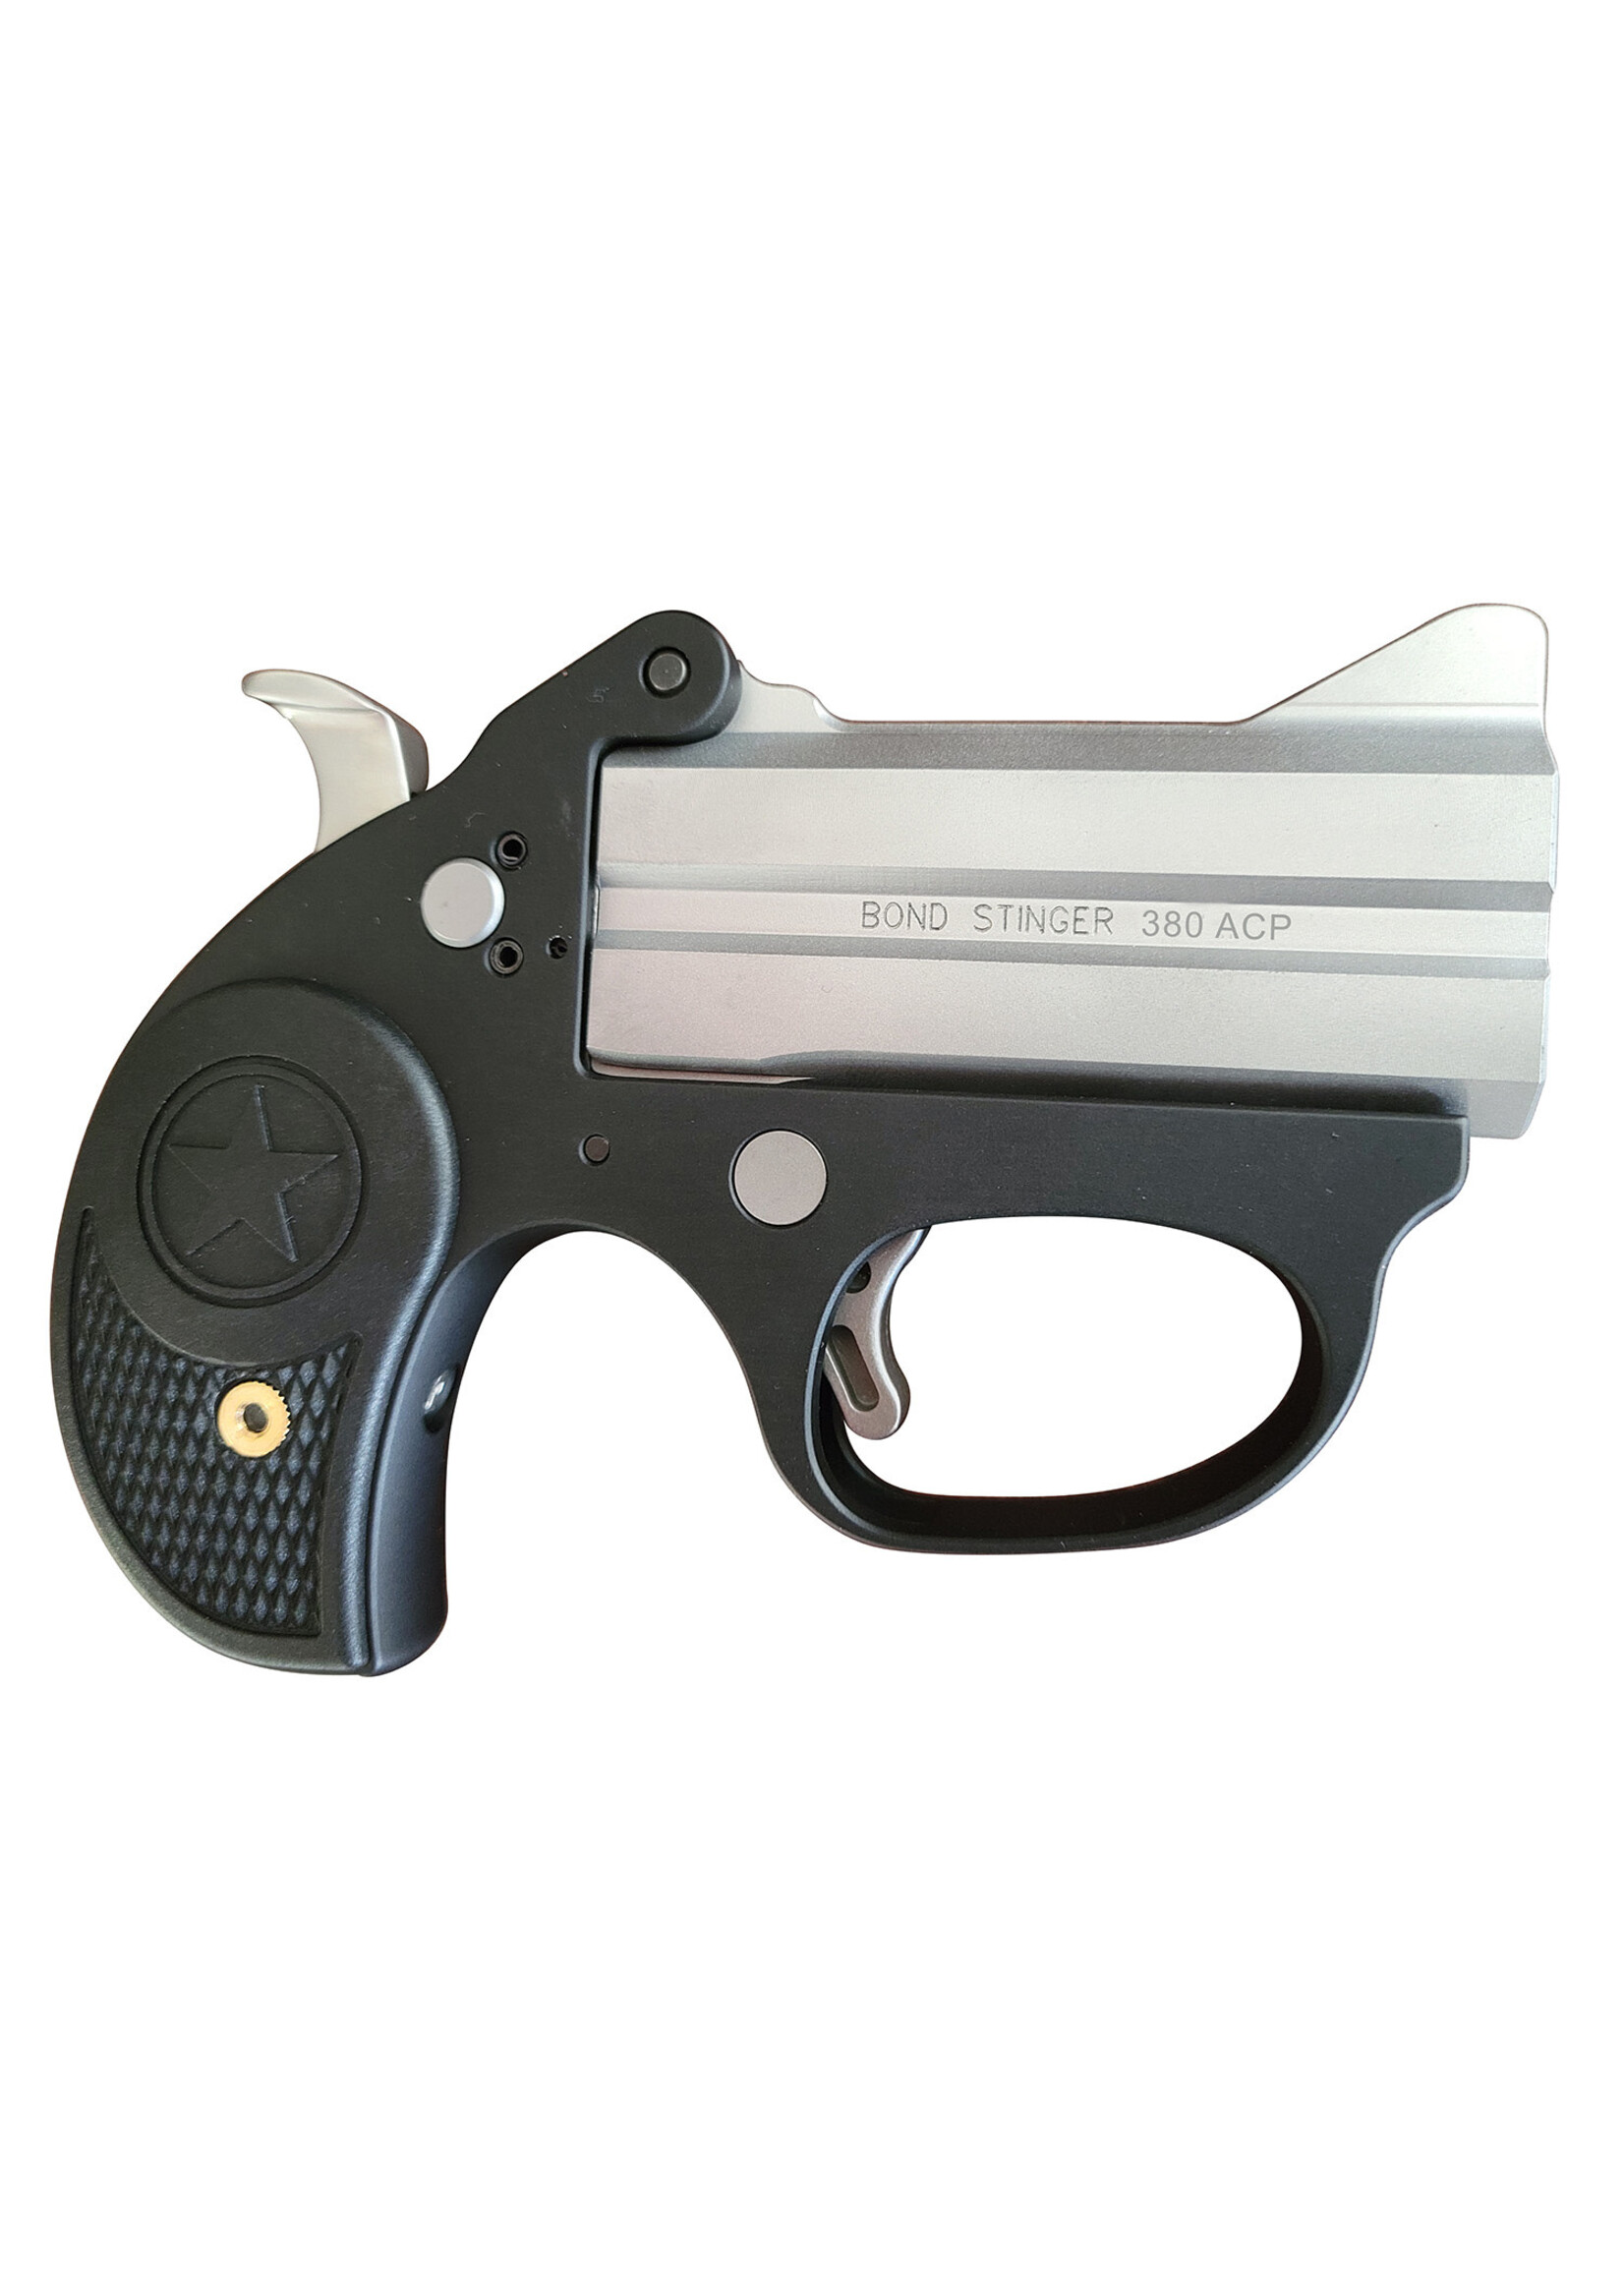 Bond Arms Bond Arms, Stinger, Derringer, 380ACP, 3" Barrel, Aluminum, Silver, Rubber Grips, Fixed Sights, 2 Rounds, With Trigger Guard